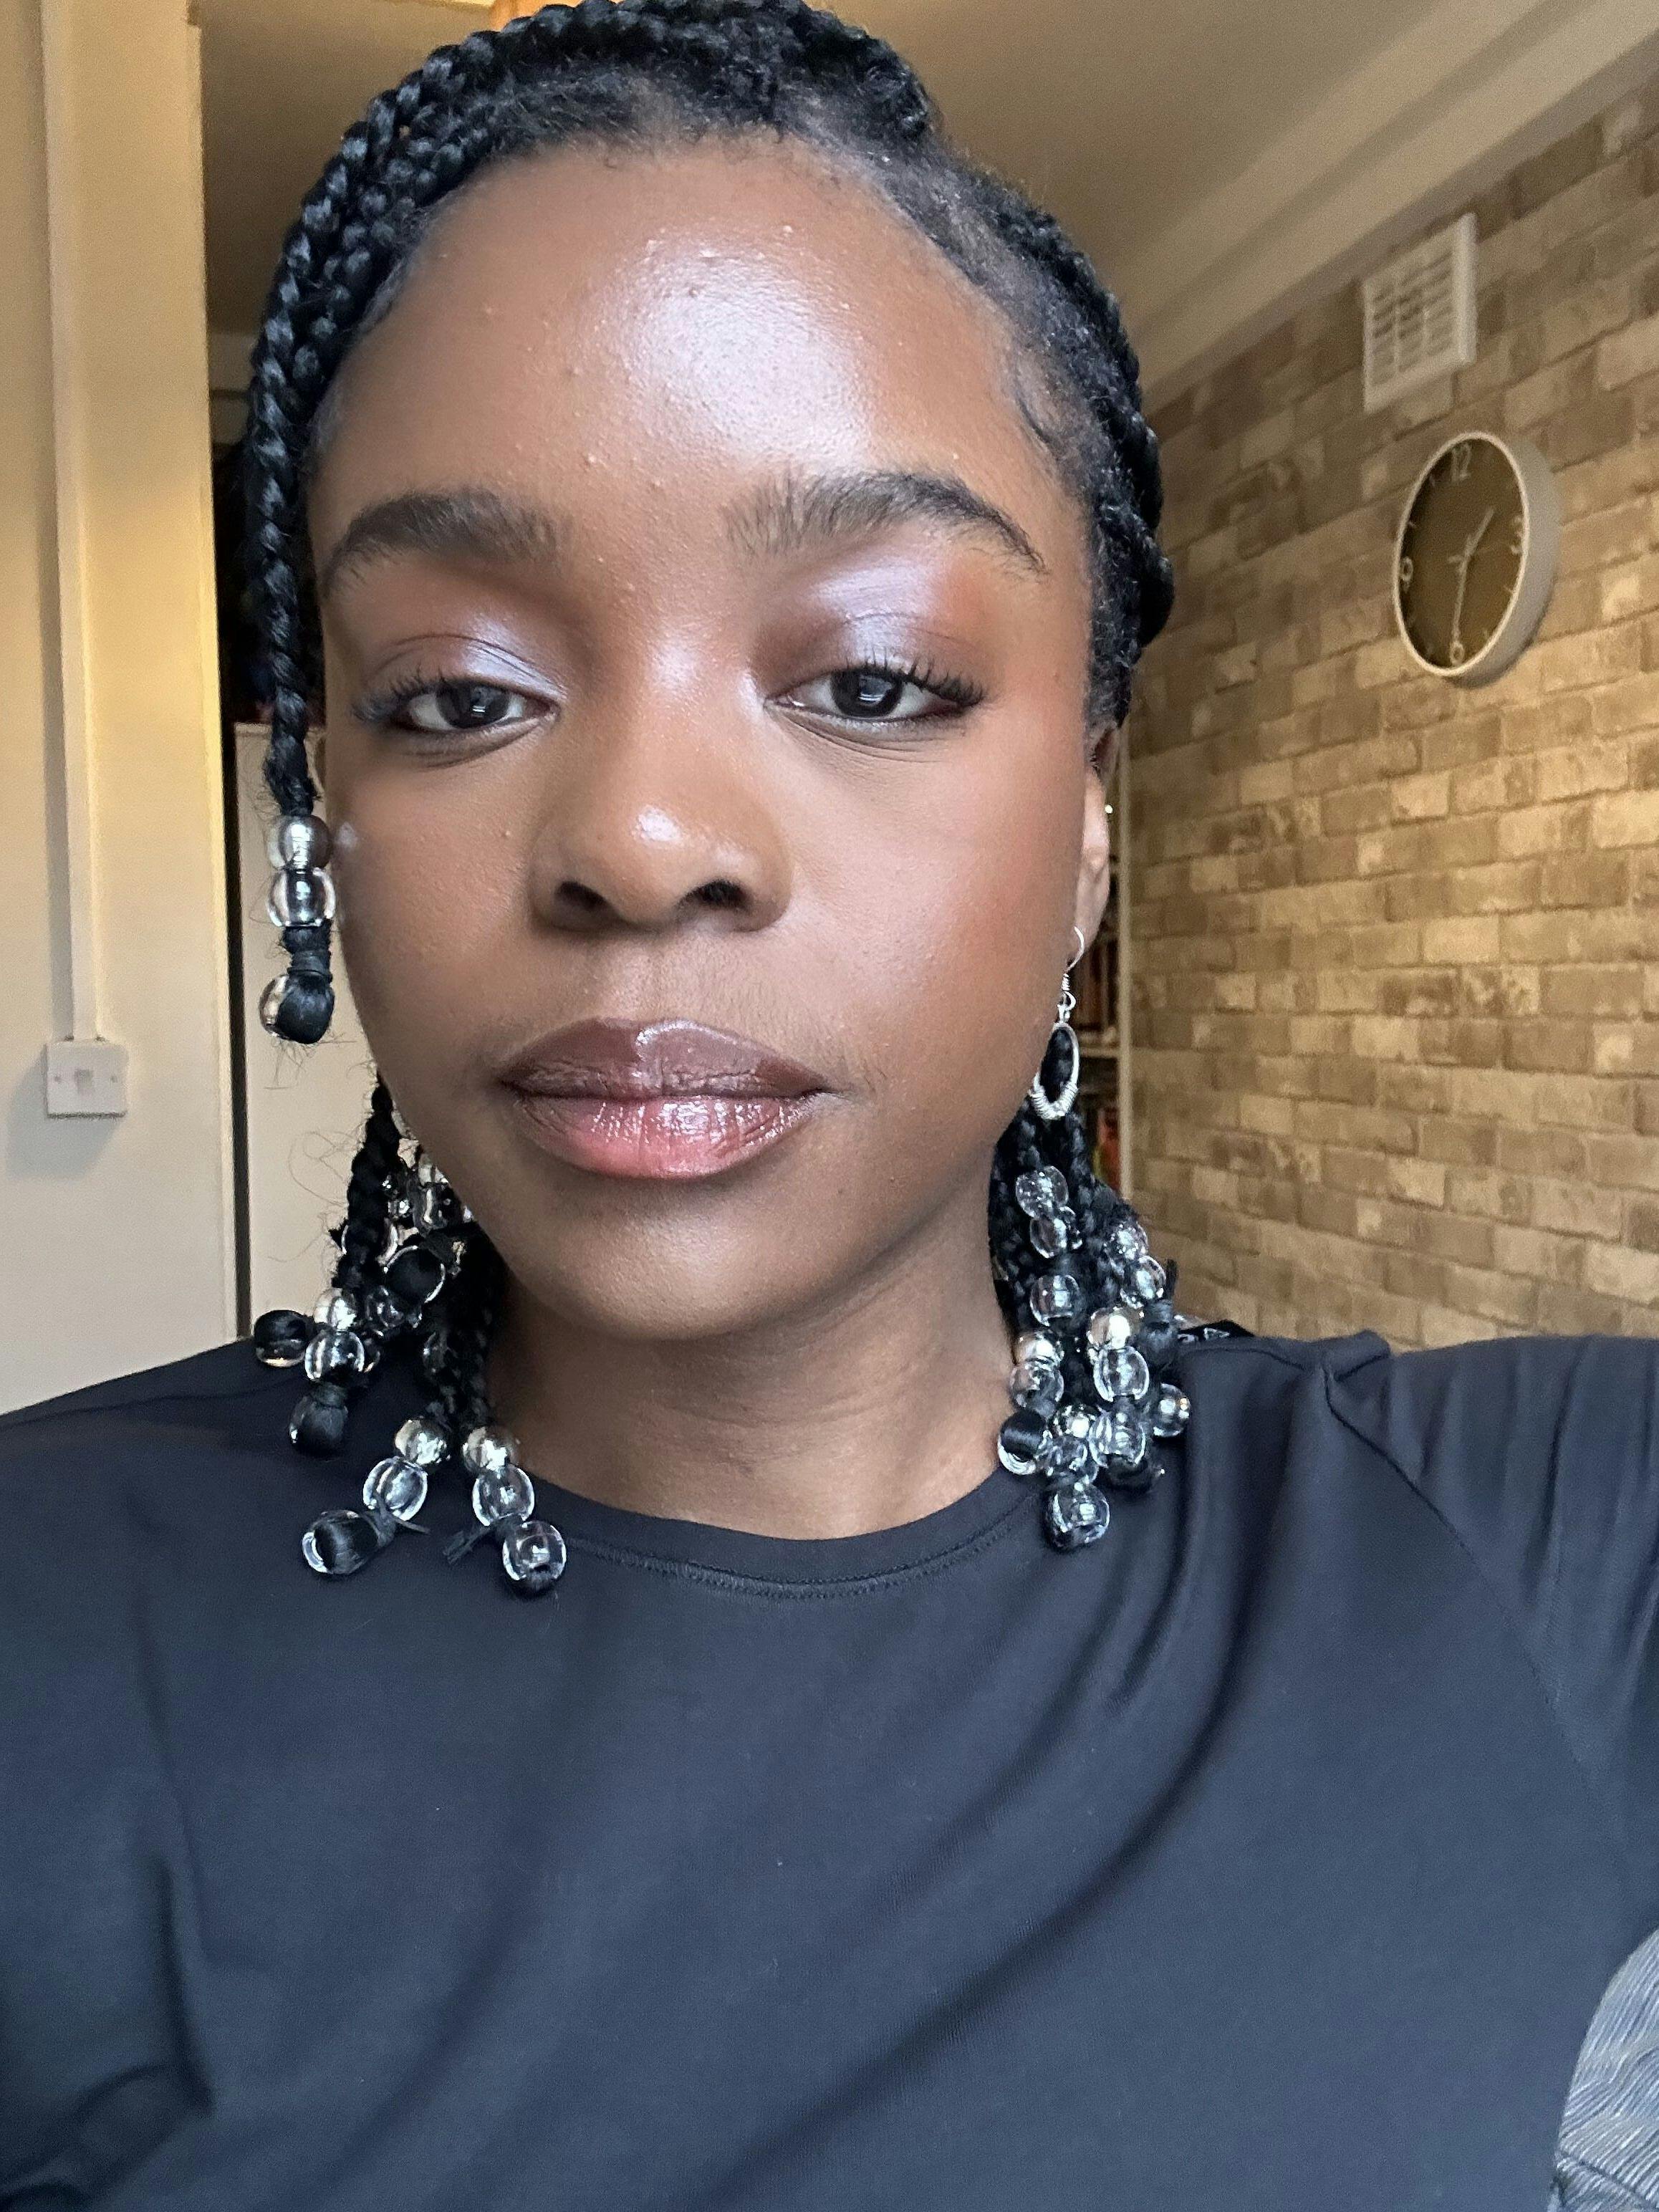 Abbie is a Black woman taking a selfie. She is wearing a black top and has black hair. She is standing in front of a brick wall with a clock on it.